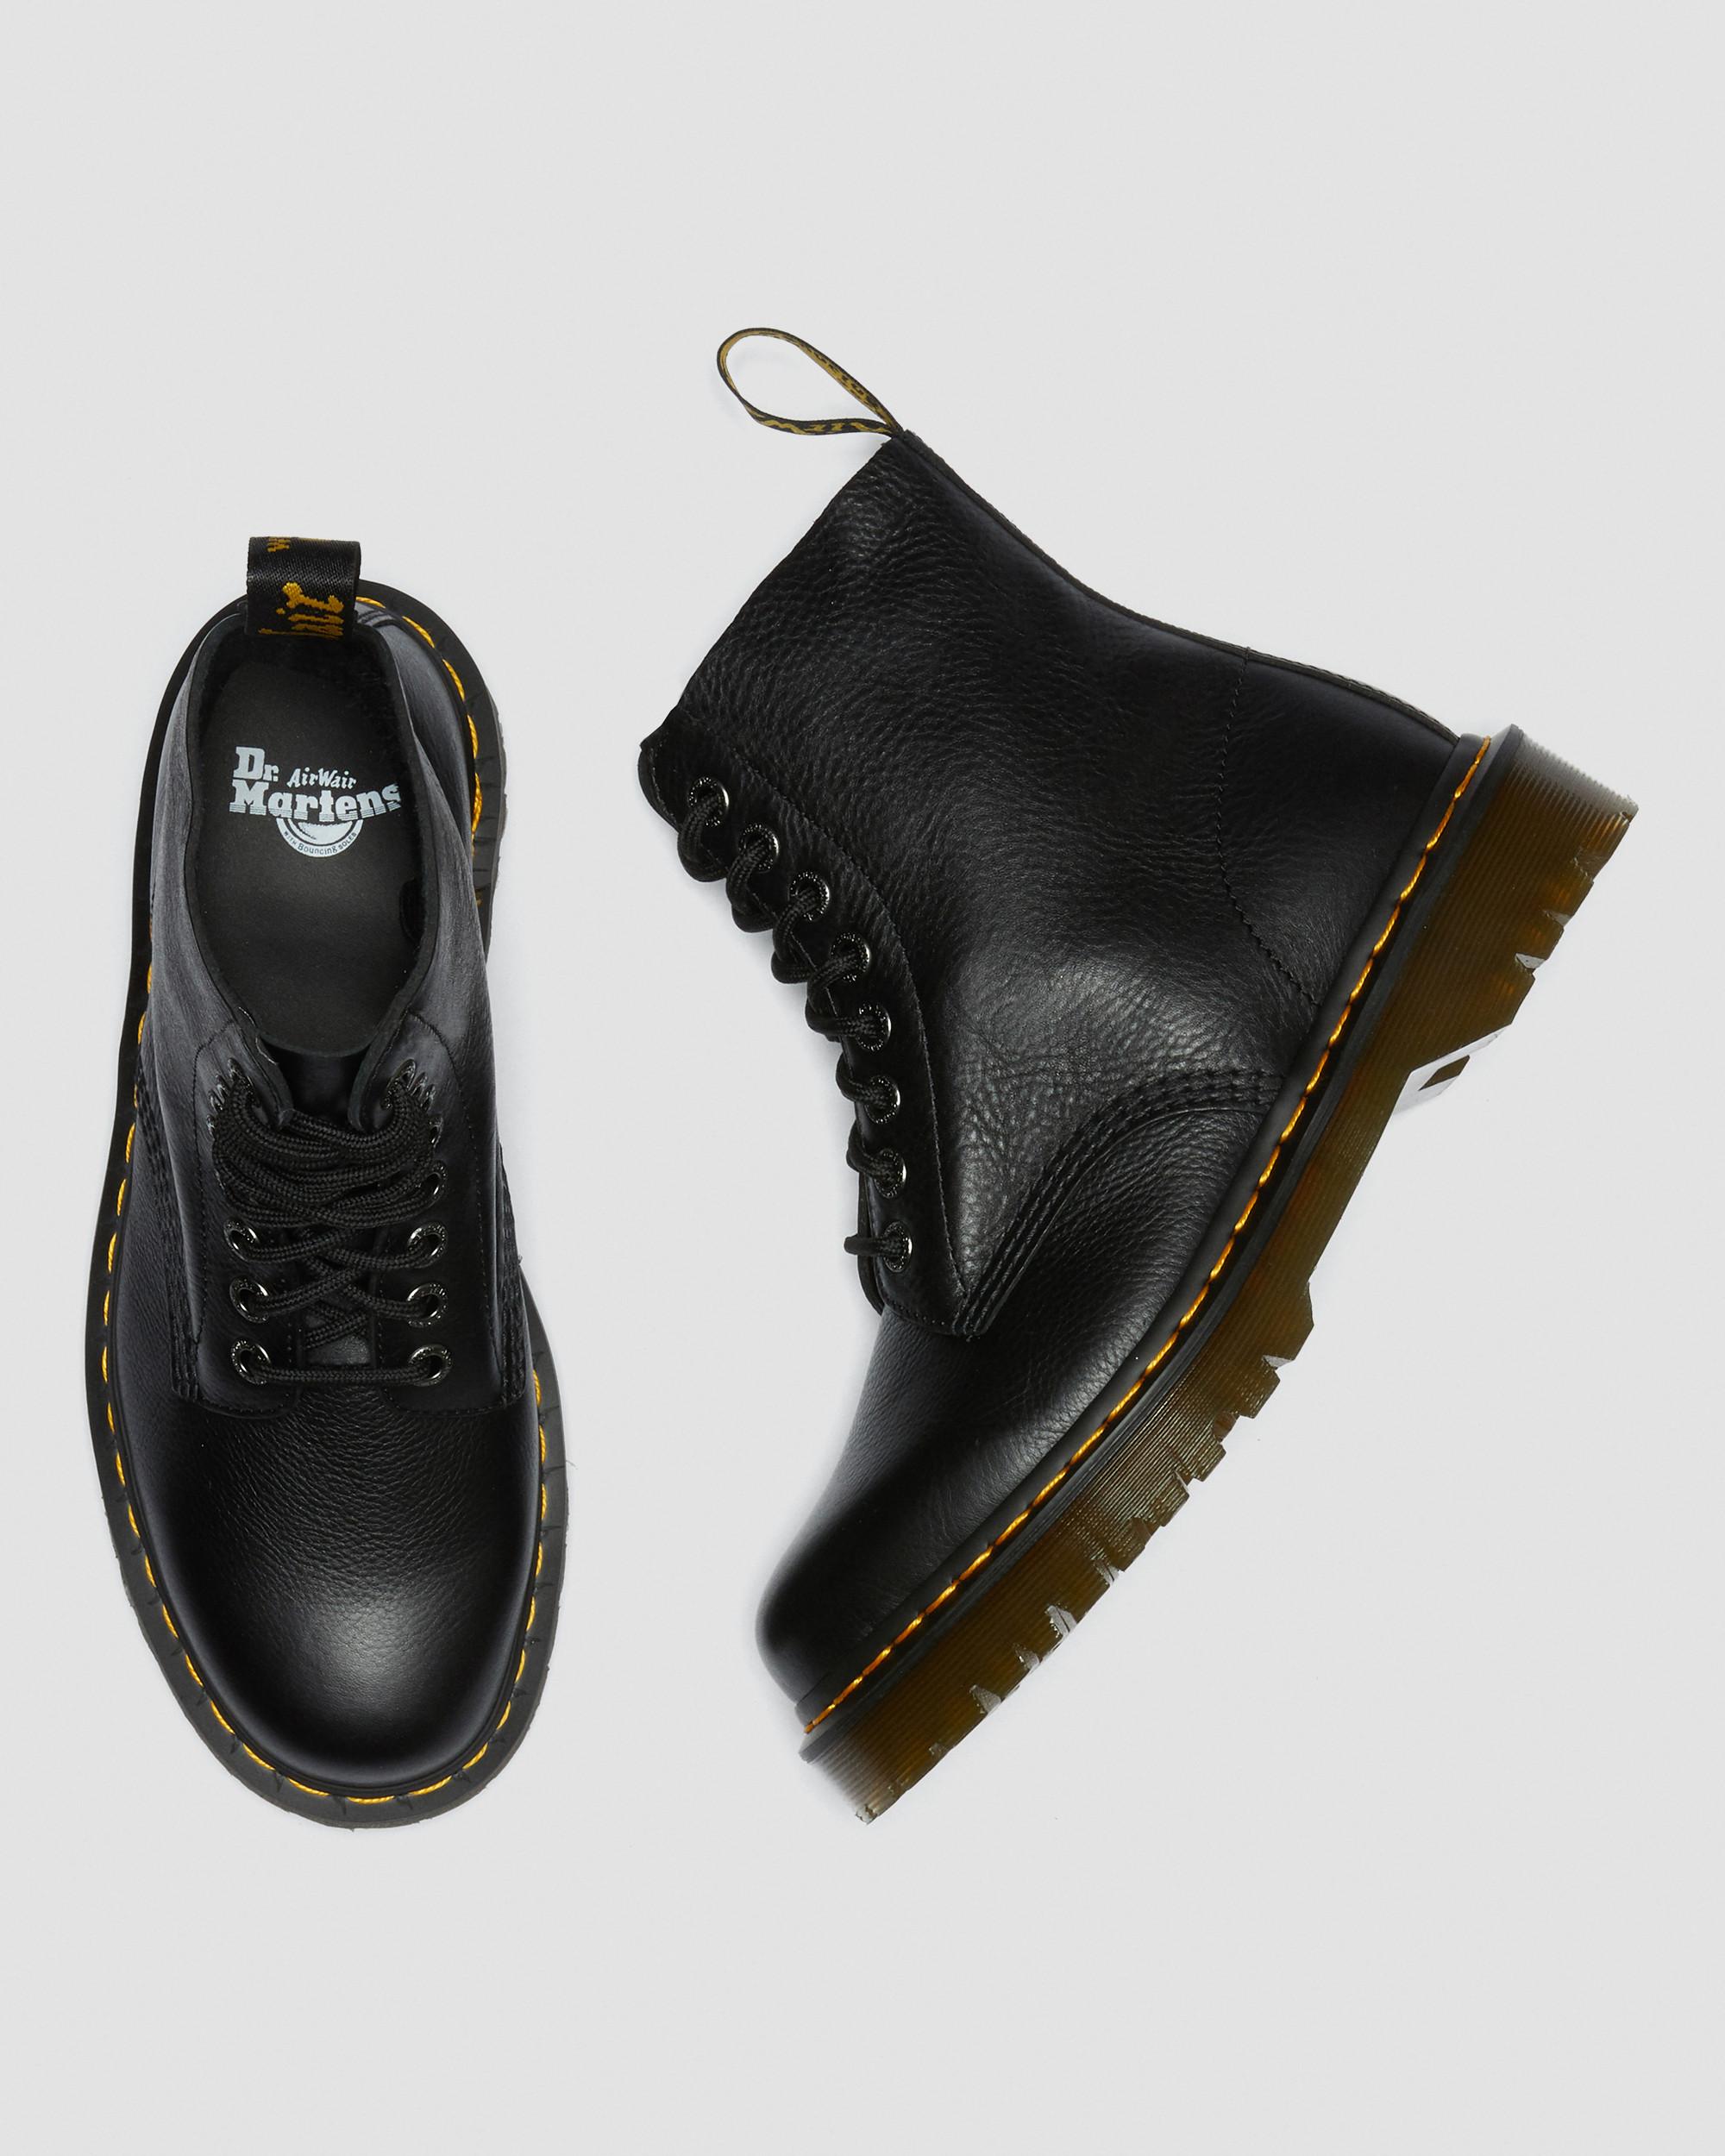 DR MARTENS 1460 Pascal Bex Pisa Leather Lace Up Boots